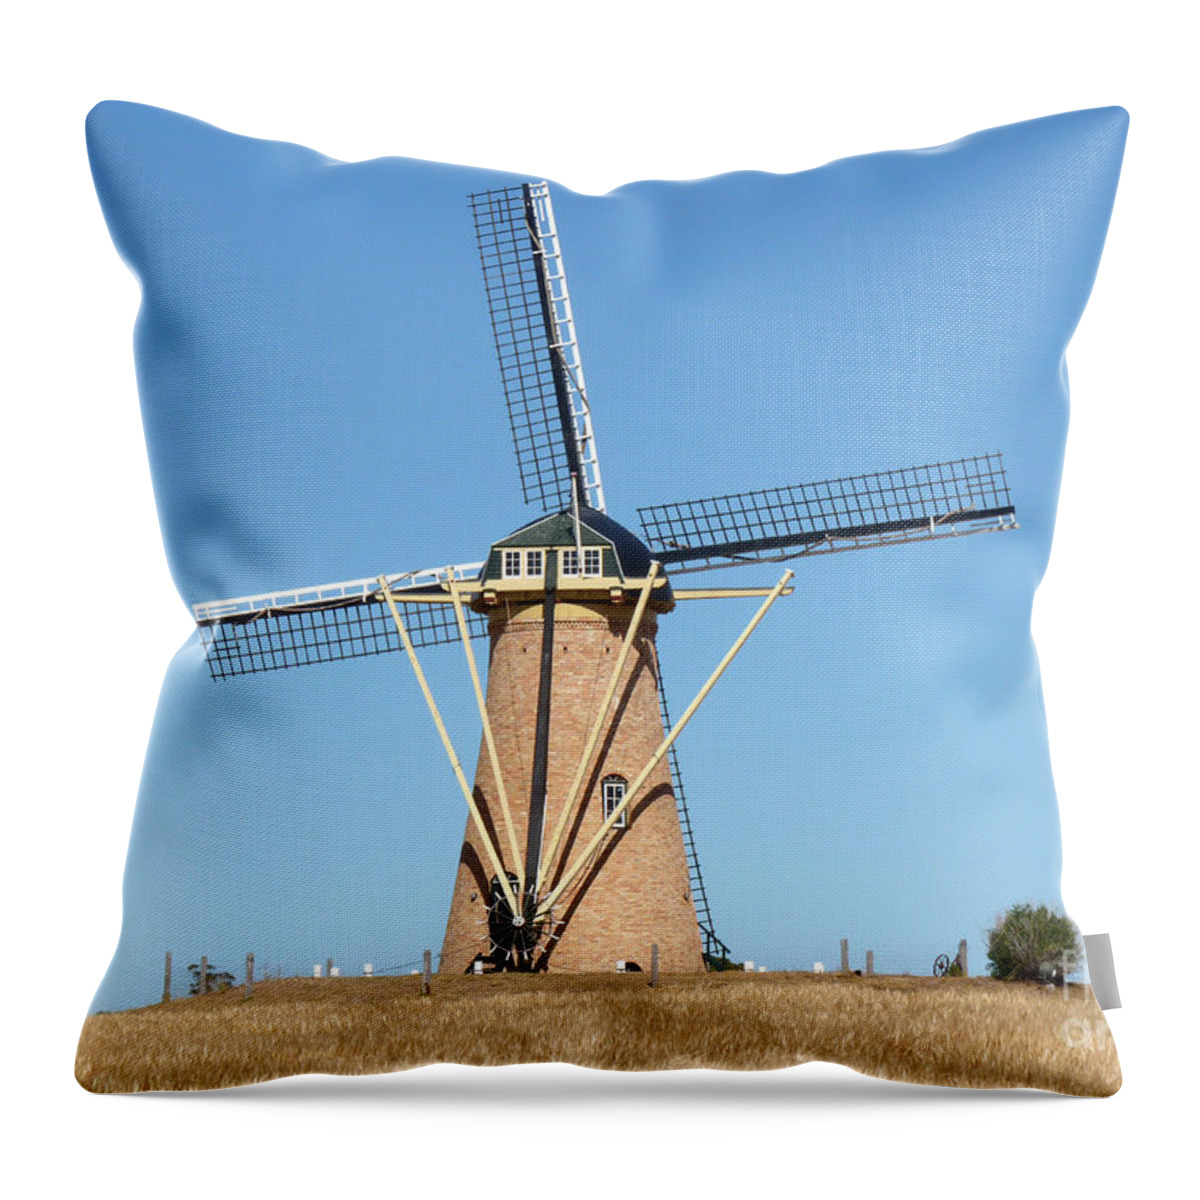 Australia Throw Pillow featuring the photograph Dutch Windmill - Western Australia by Phil Banks